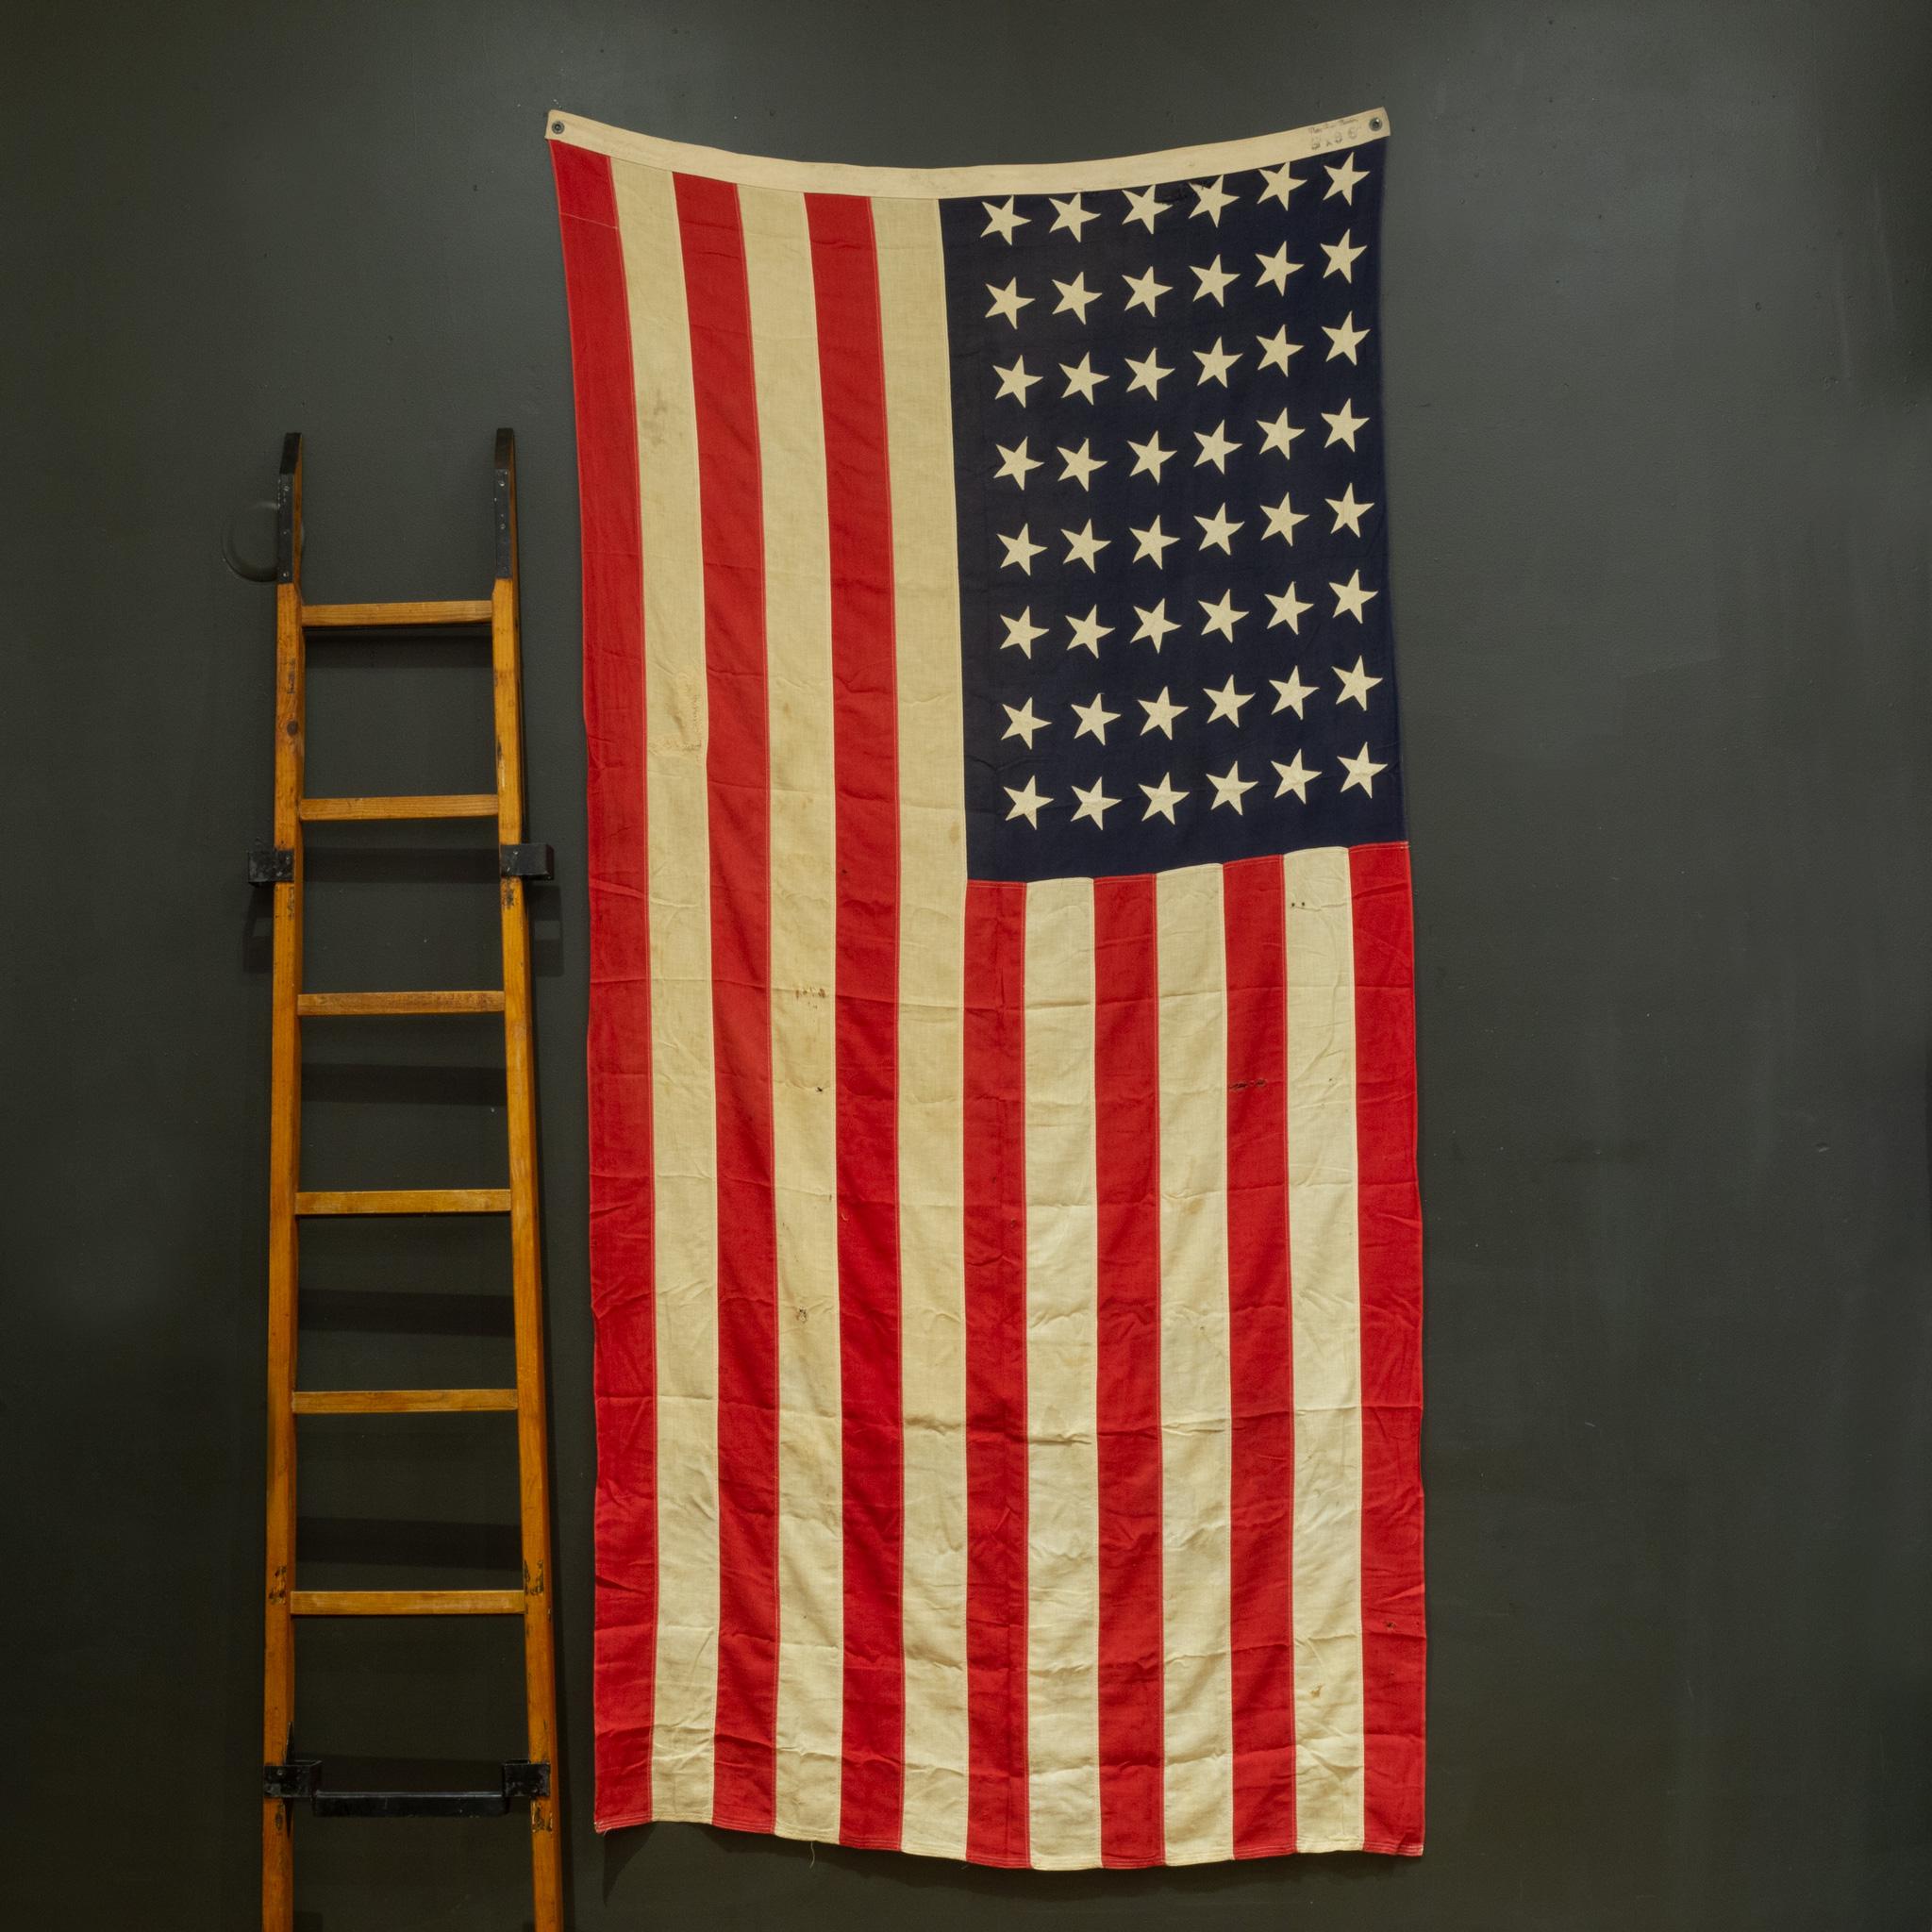 ABOUT

An original monumental American flag with 48 hand sewn stars and metal grommets to hang it.

    CREATOR Best Ross Bunting.
    DATE OF MANUFACTURE c.1940-1950.
    MATERIALS AND TECHNIQUES Cotton, Metal.
    CONDITION Good. Wear consistent